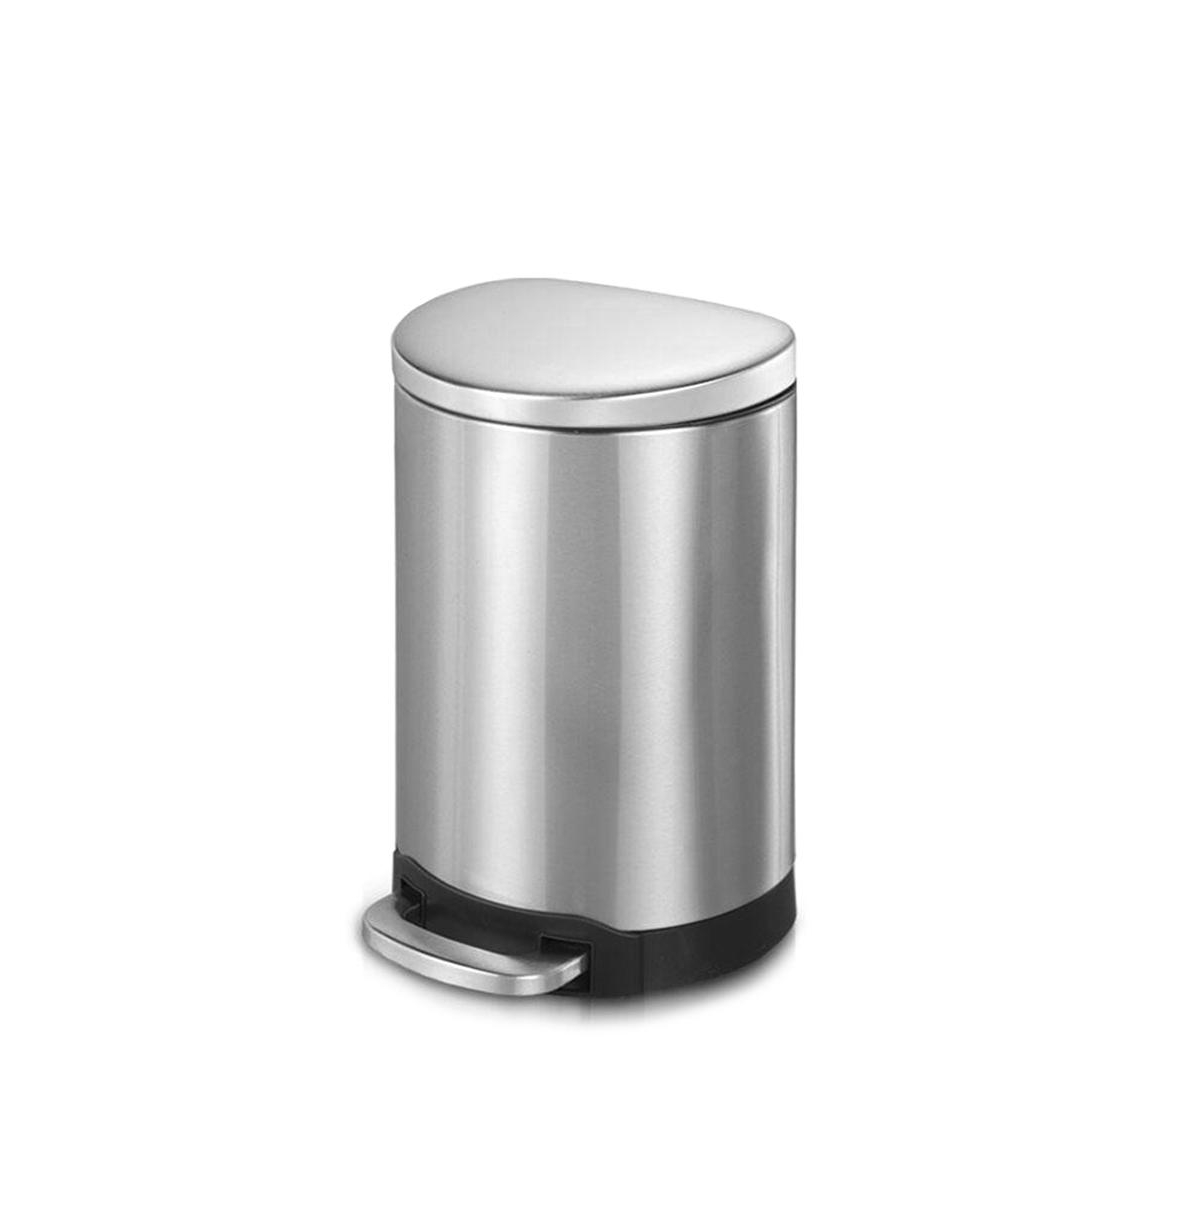 3.2 Gal./12 Liter Stainless Steel Semi-round Step-on Trash Can for Bathroom and Office - Silver